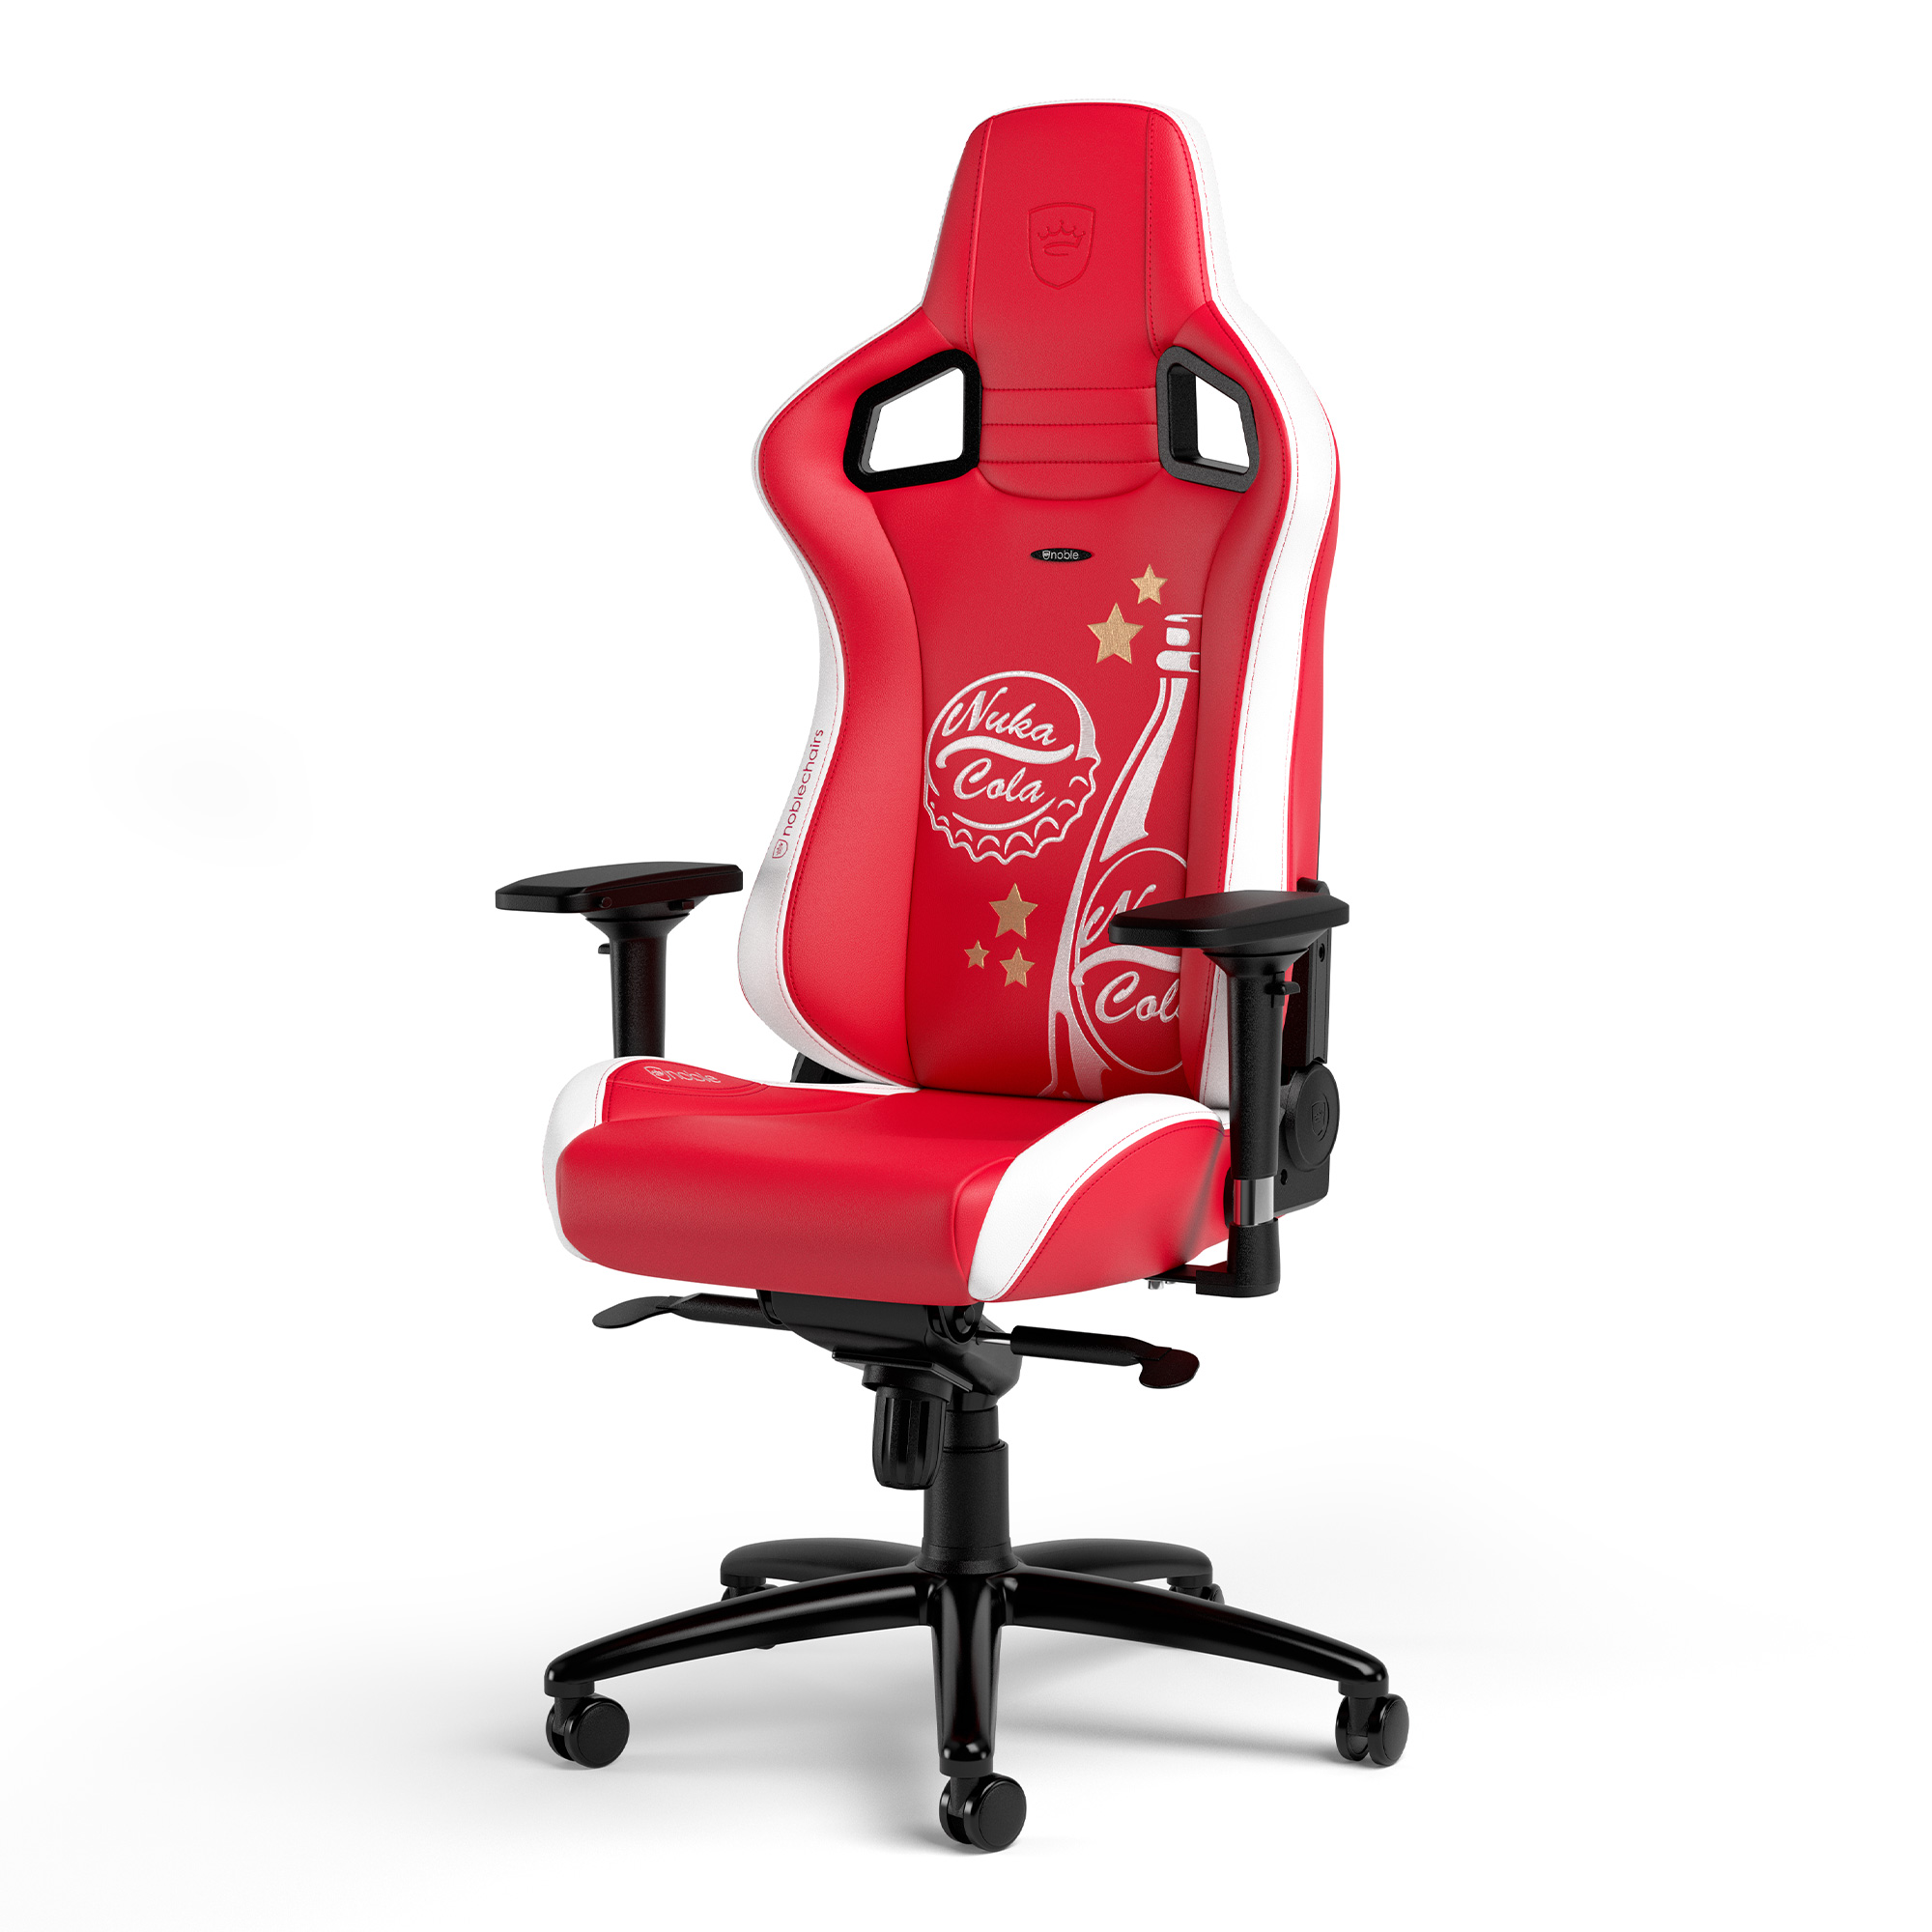 noblechairs EPIC Gaming Chair Fallout Nuka-Cola Edition